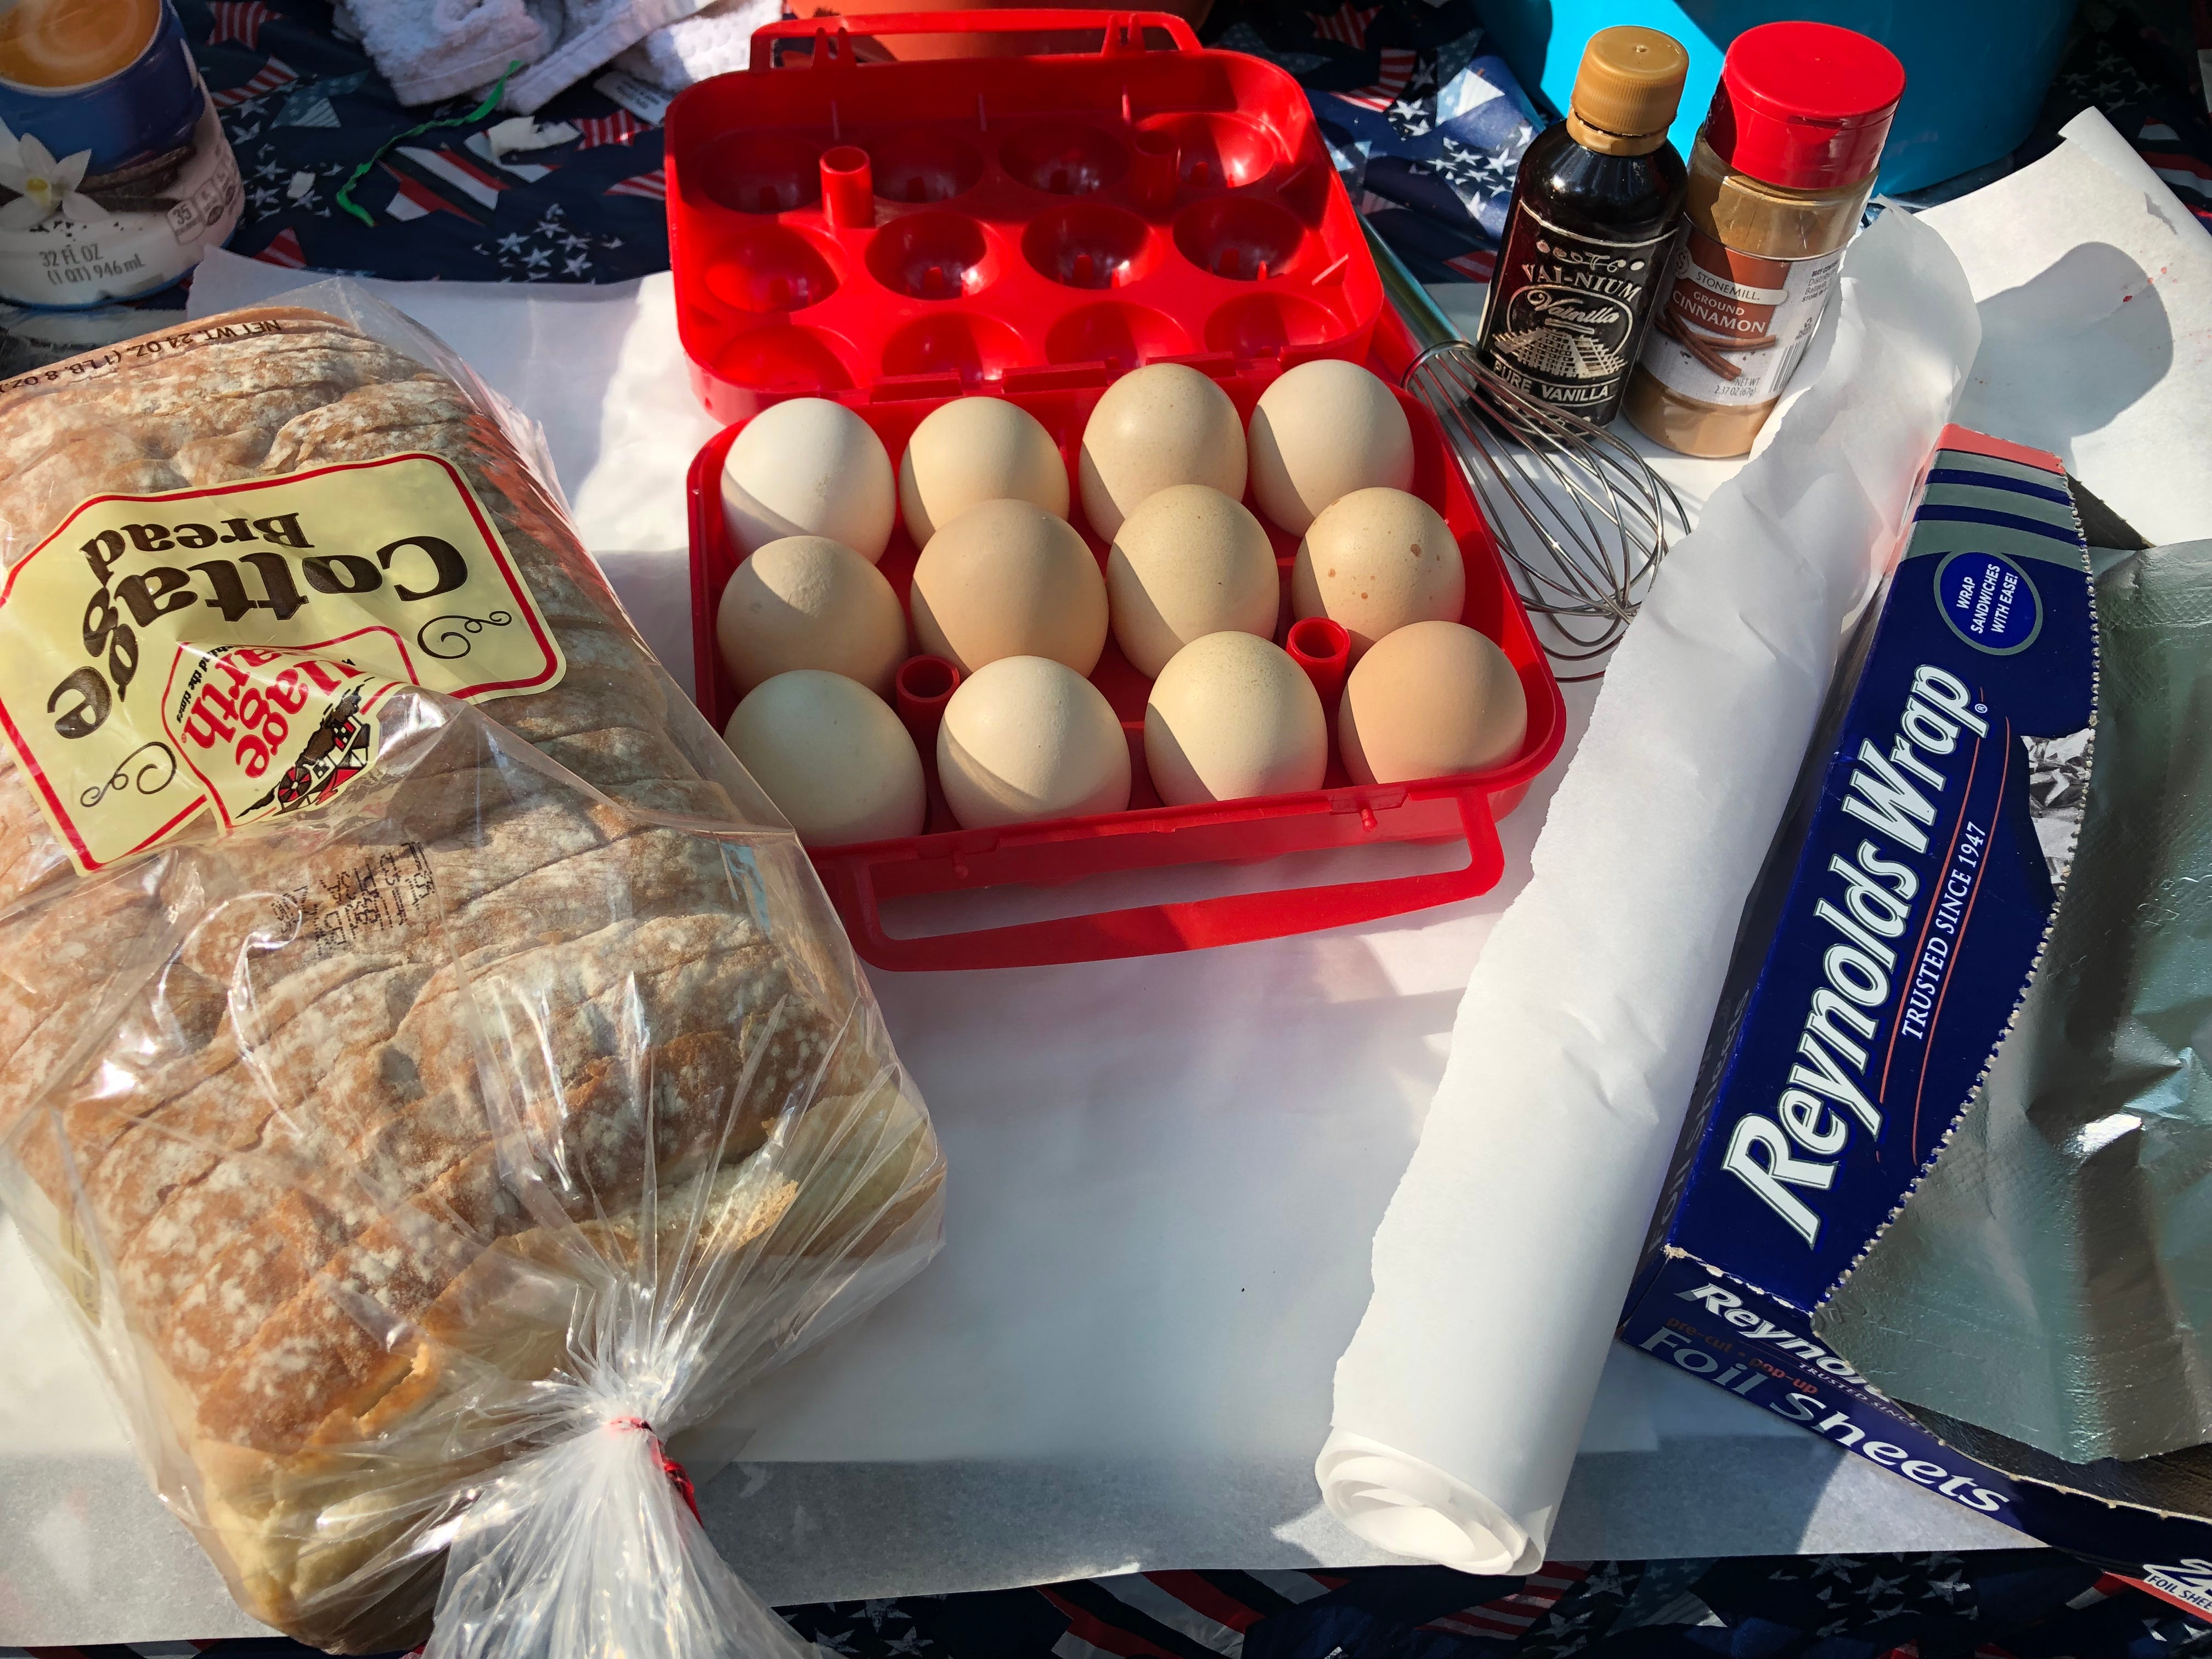 Getting all the ingredients together to make a campfire French toast